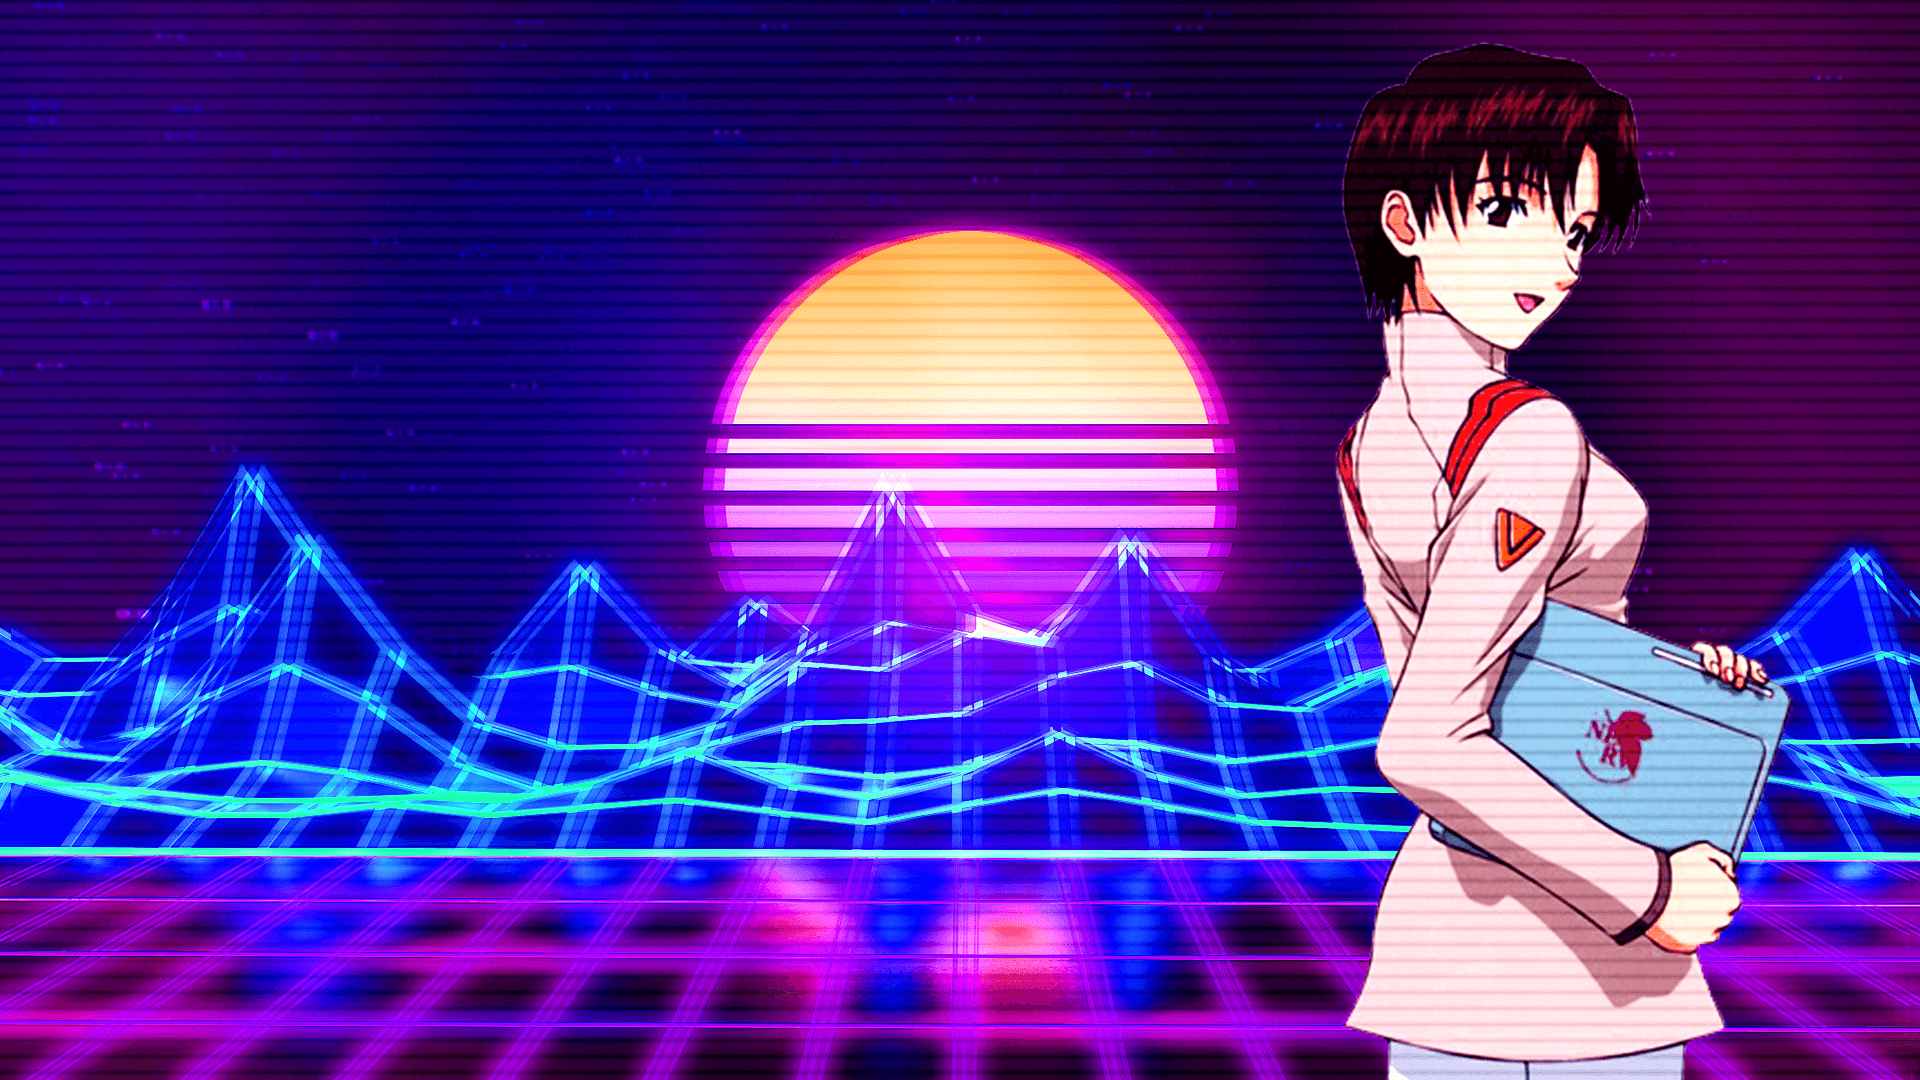 My first attempt at making a vaporwave wallpaper featuring best